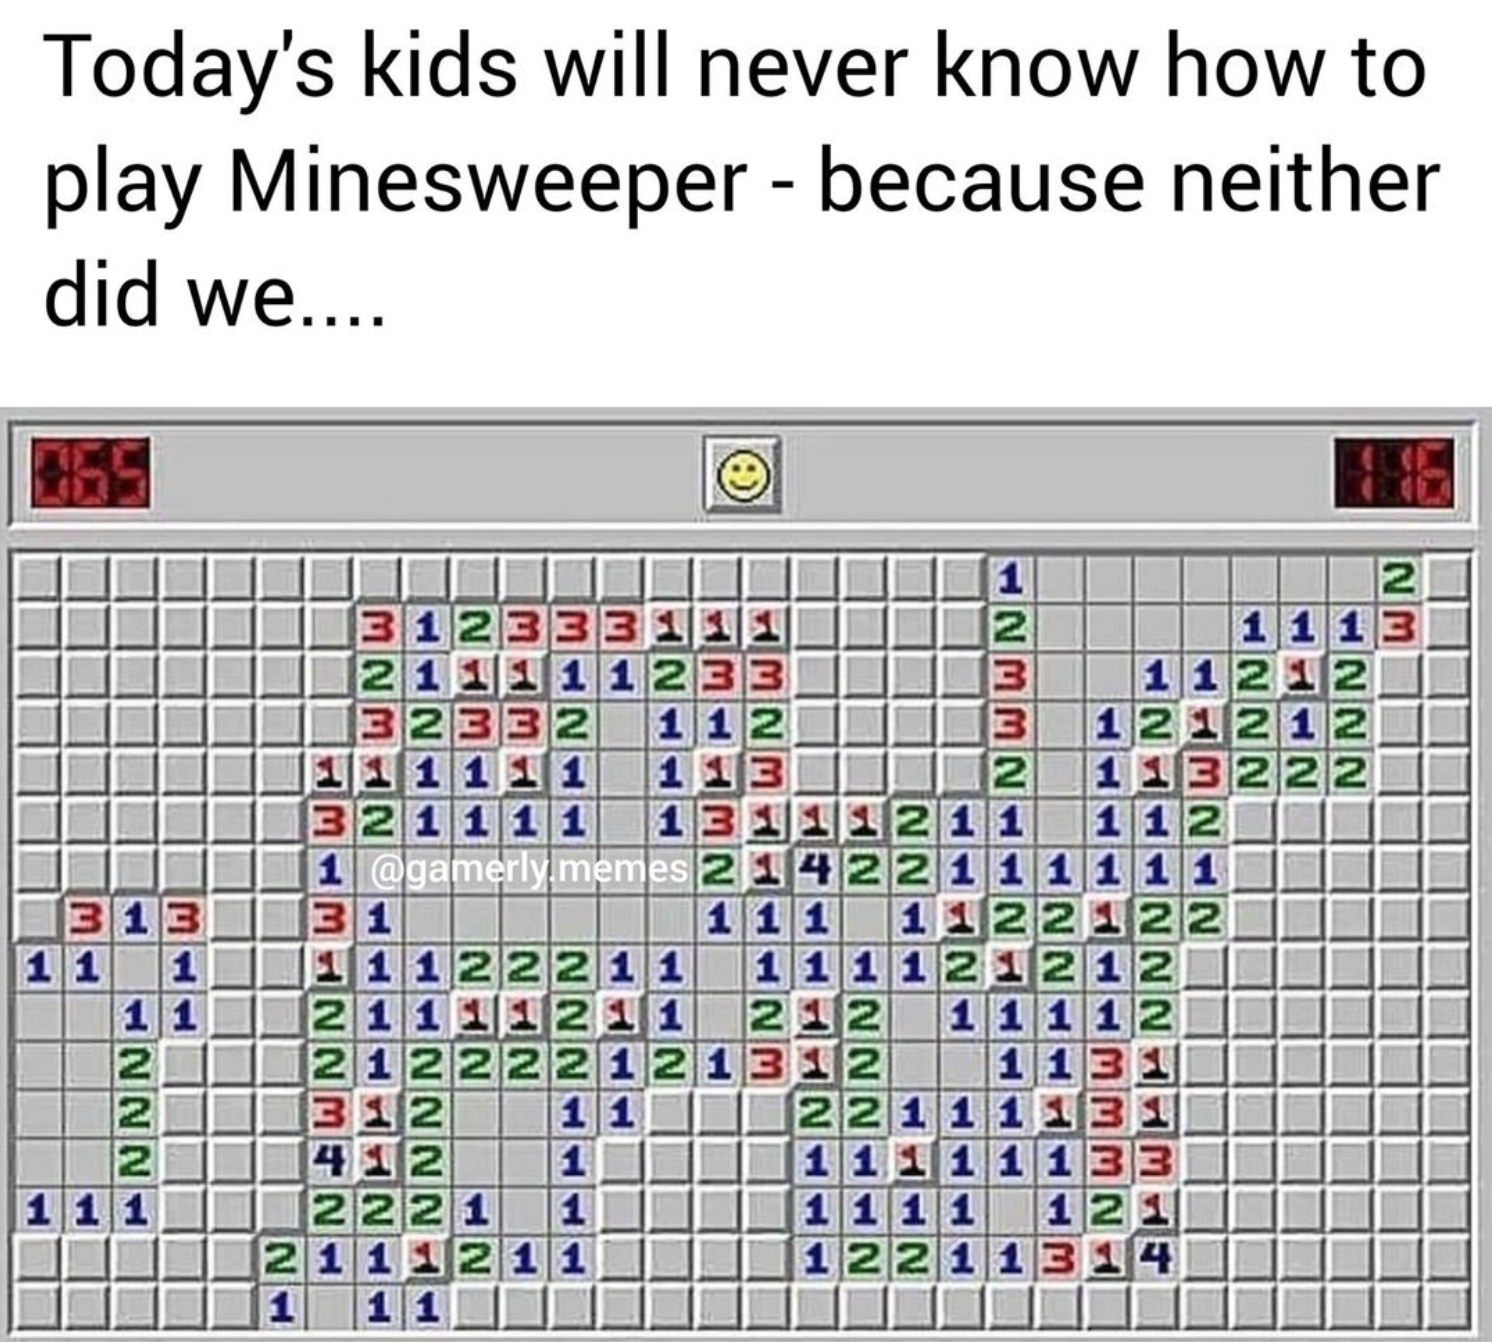 funny gaming memes - point - Today's kids will never know how to play Minesweeper because neither did we.... Wn Nwnw W Ww He Nwu 3 13 1 11 2 1 1 211 1233 3 23 2 1 12 3 1211212 1 1 1 1 1 1 13 2 1 22 1 1 1 1 1 2 1 11 1 memes 211422 1 1 31 1 1 1 2 1 1 12 1 1